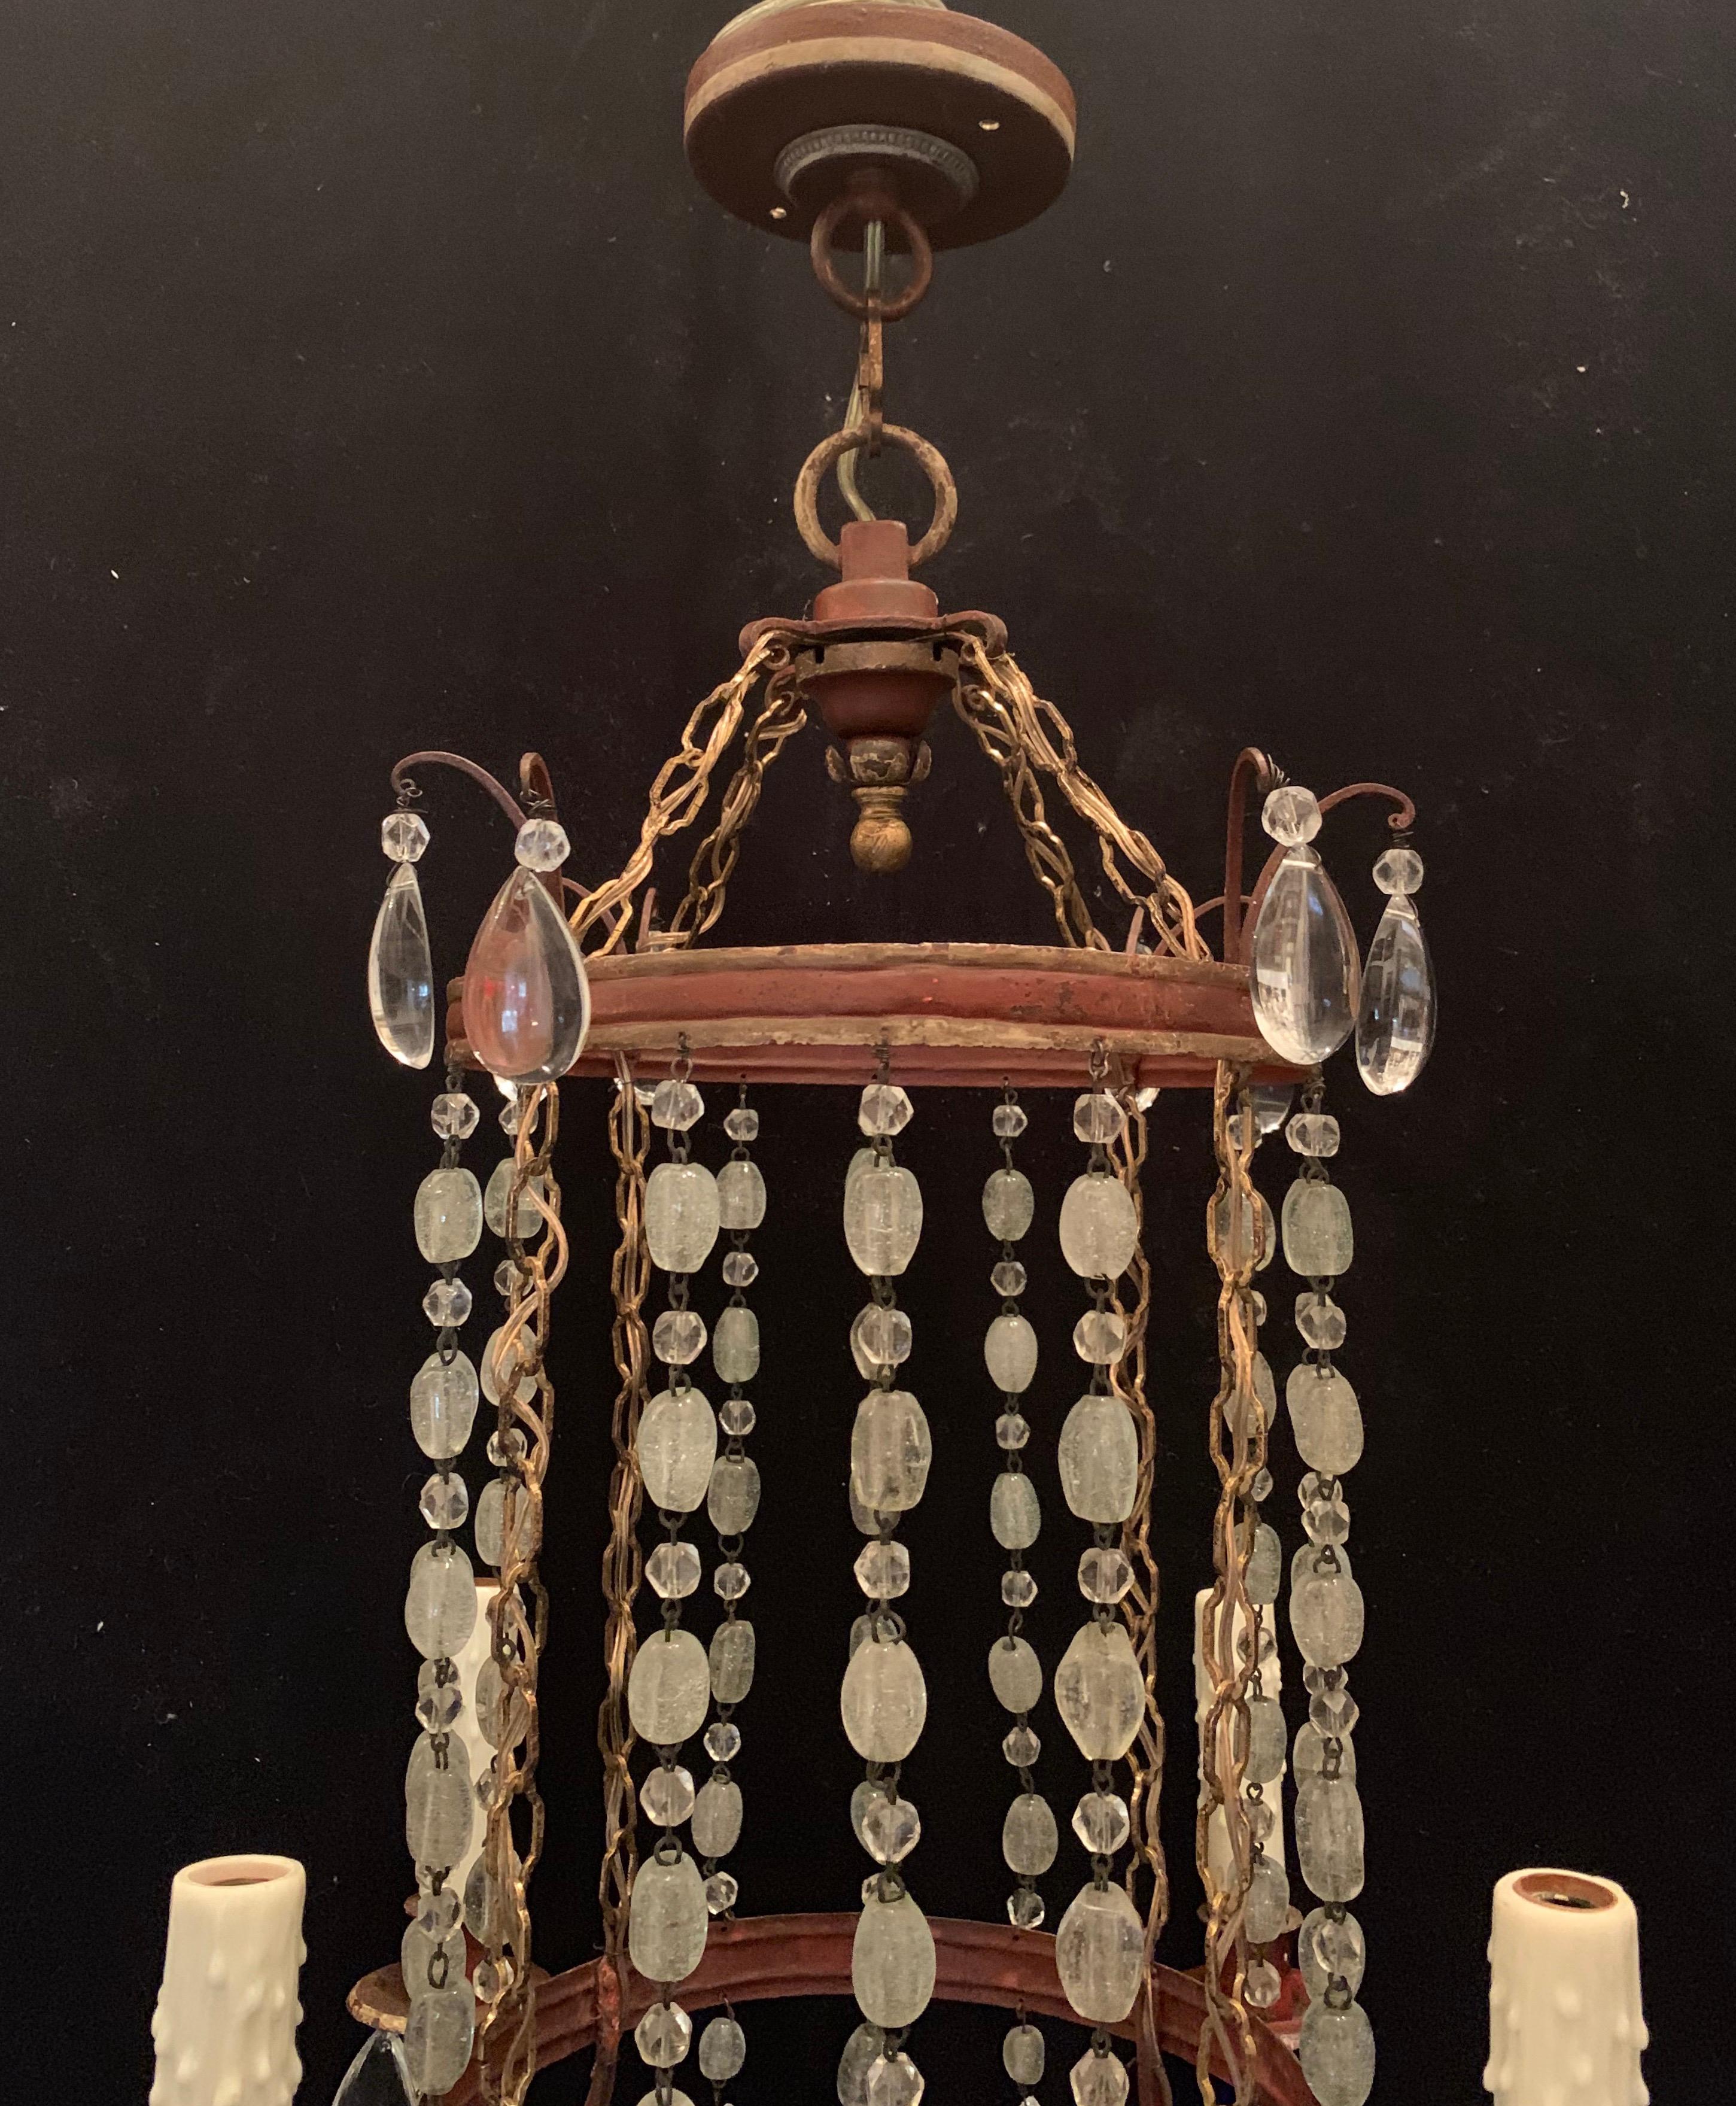 A wonderful beaded crystal drop and red tole with gold gilt pagoda / lantern form pendant chandelier with 4 candelabra lights, completely rewired and ready to install and enjoy in the manner of Baguès.